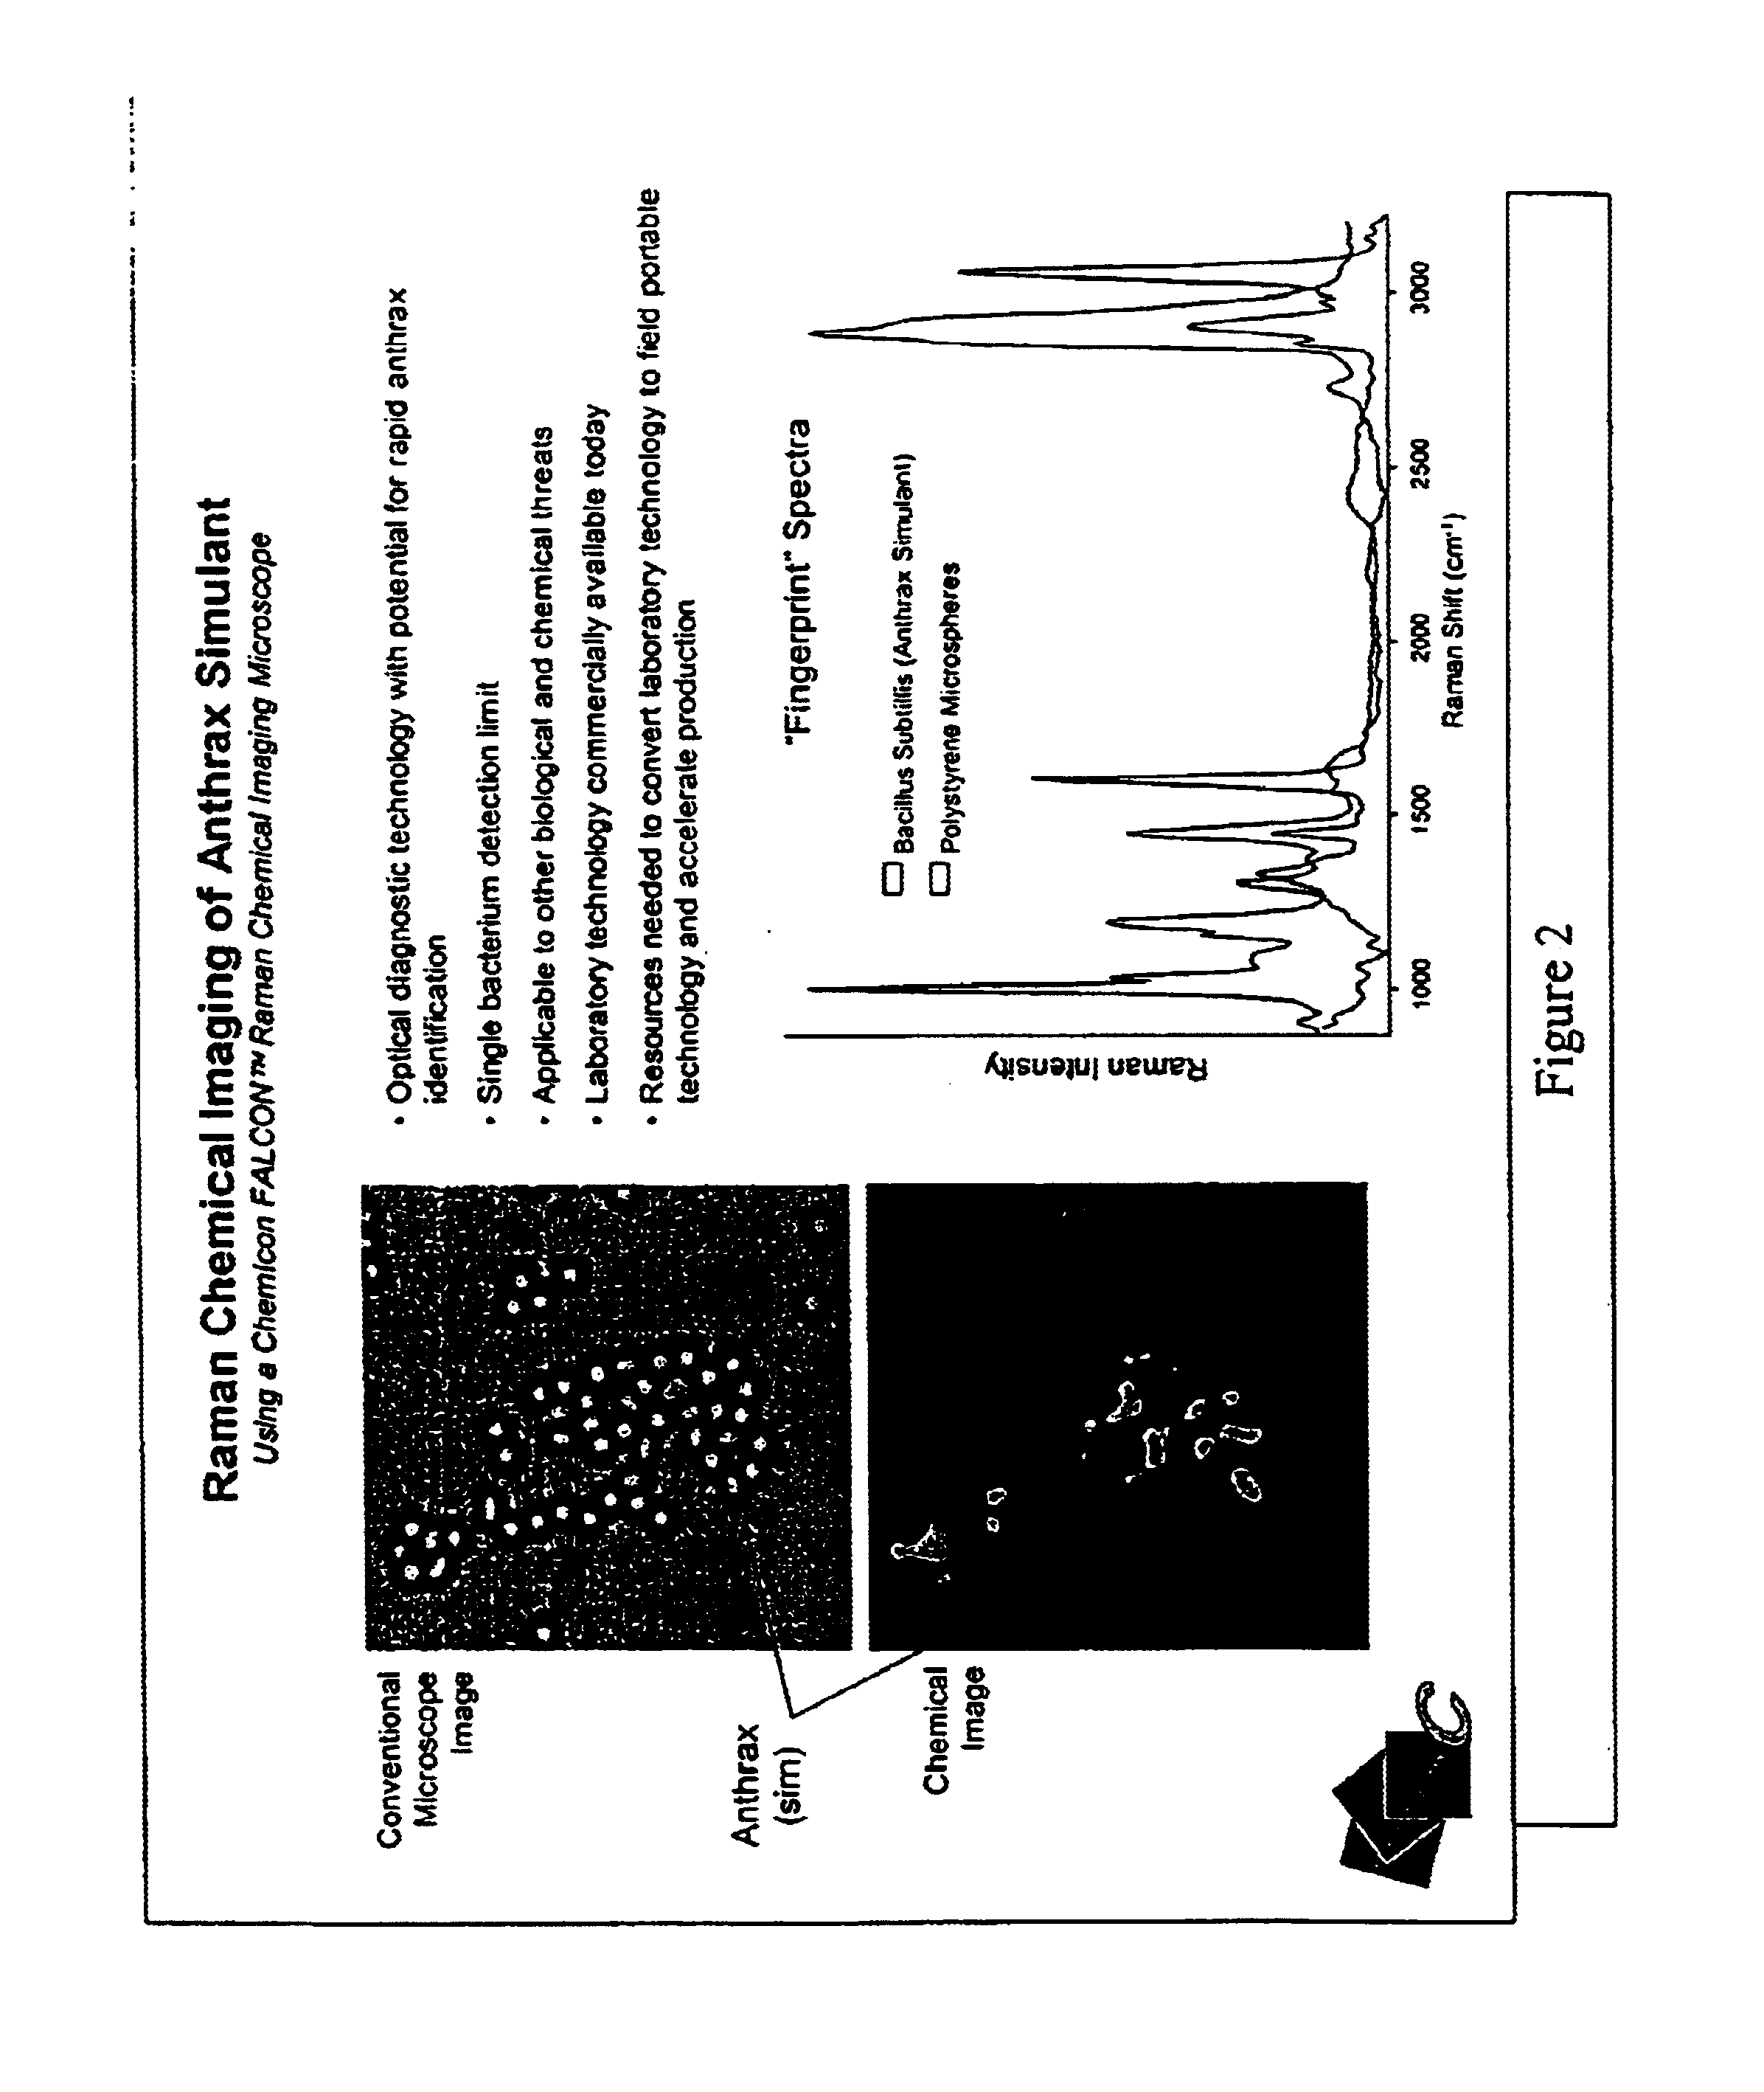 Method for detection of pathogenic microorganisms